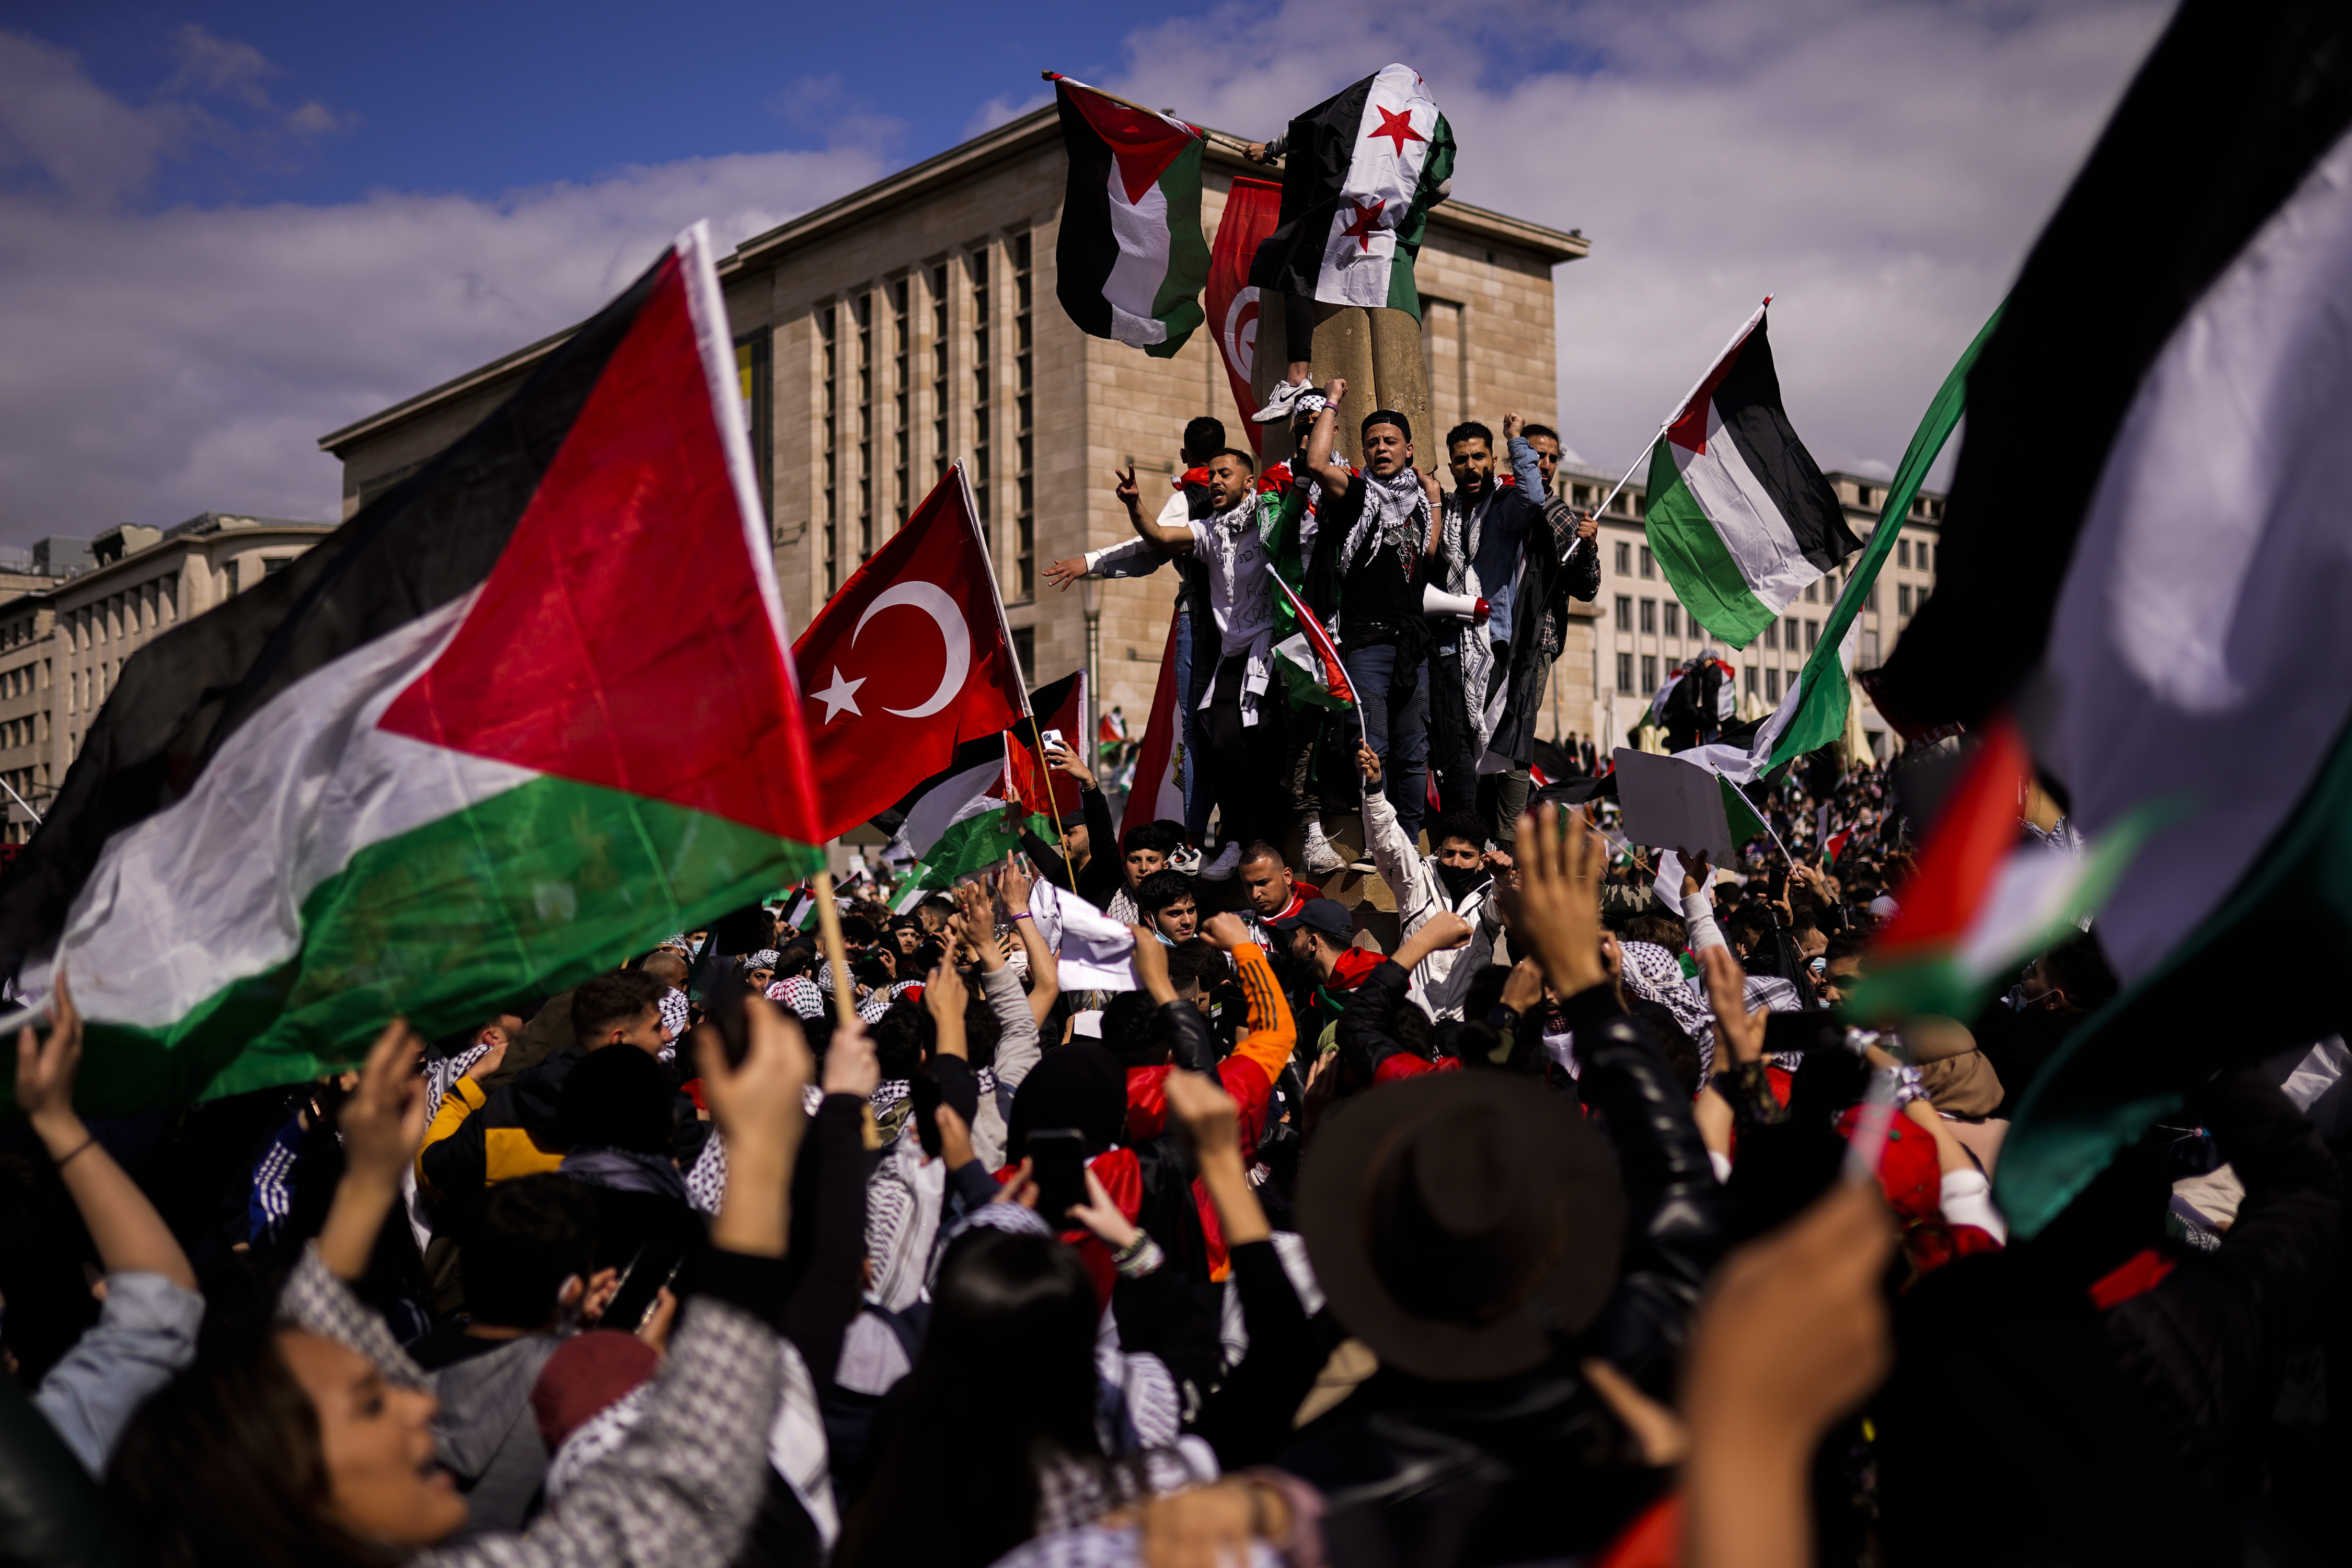 People wave Palestinian and a Turkish flag as they shout slogans during a protest in support of Palestinians in the Gaza Strip, in Brussels, Saturday, May 15, 2021. (AP Photo/Francisco Seco)